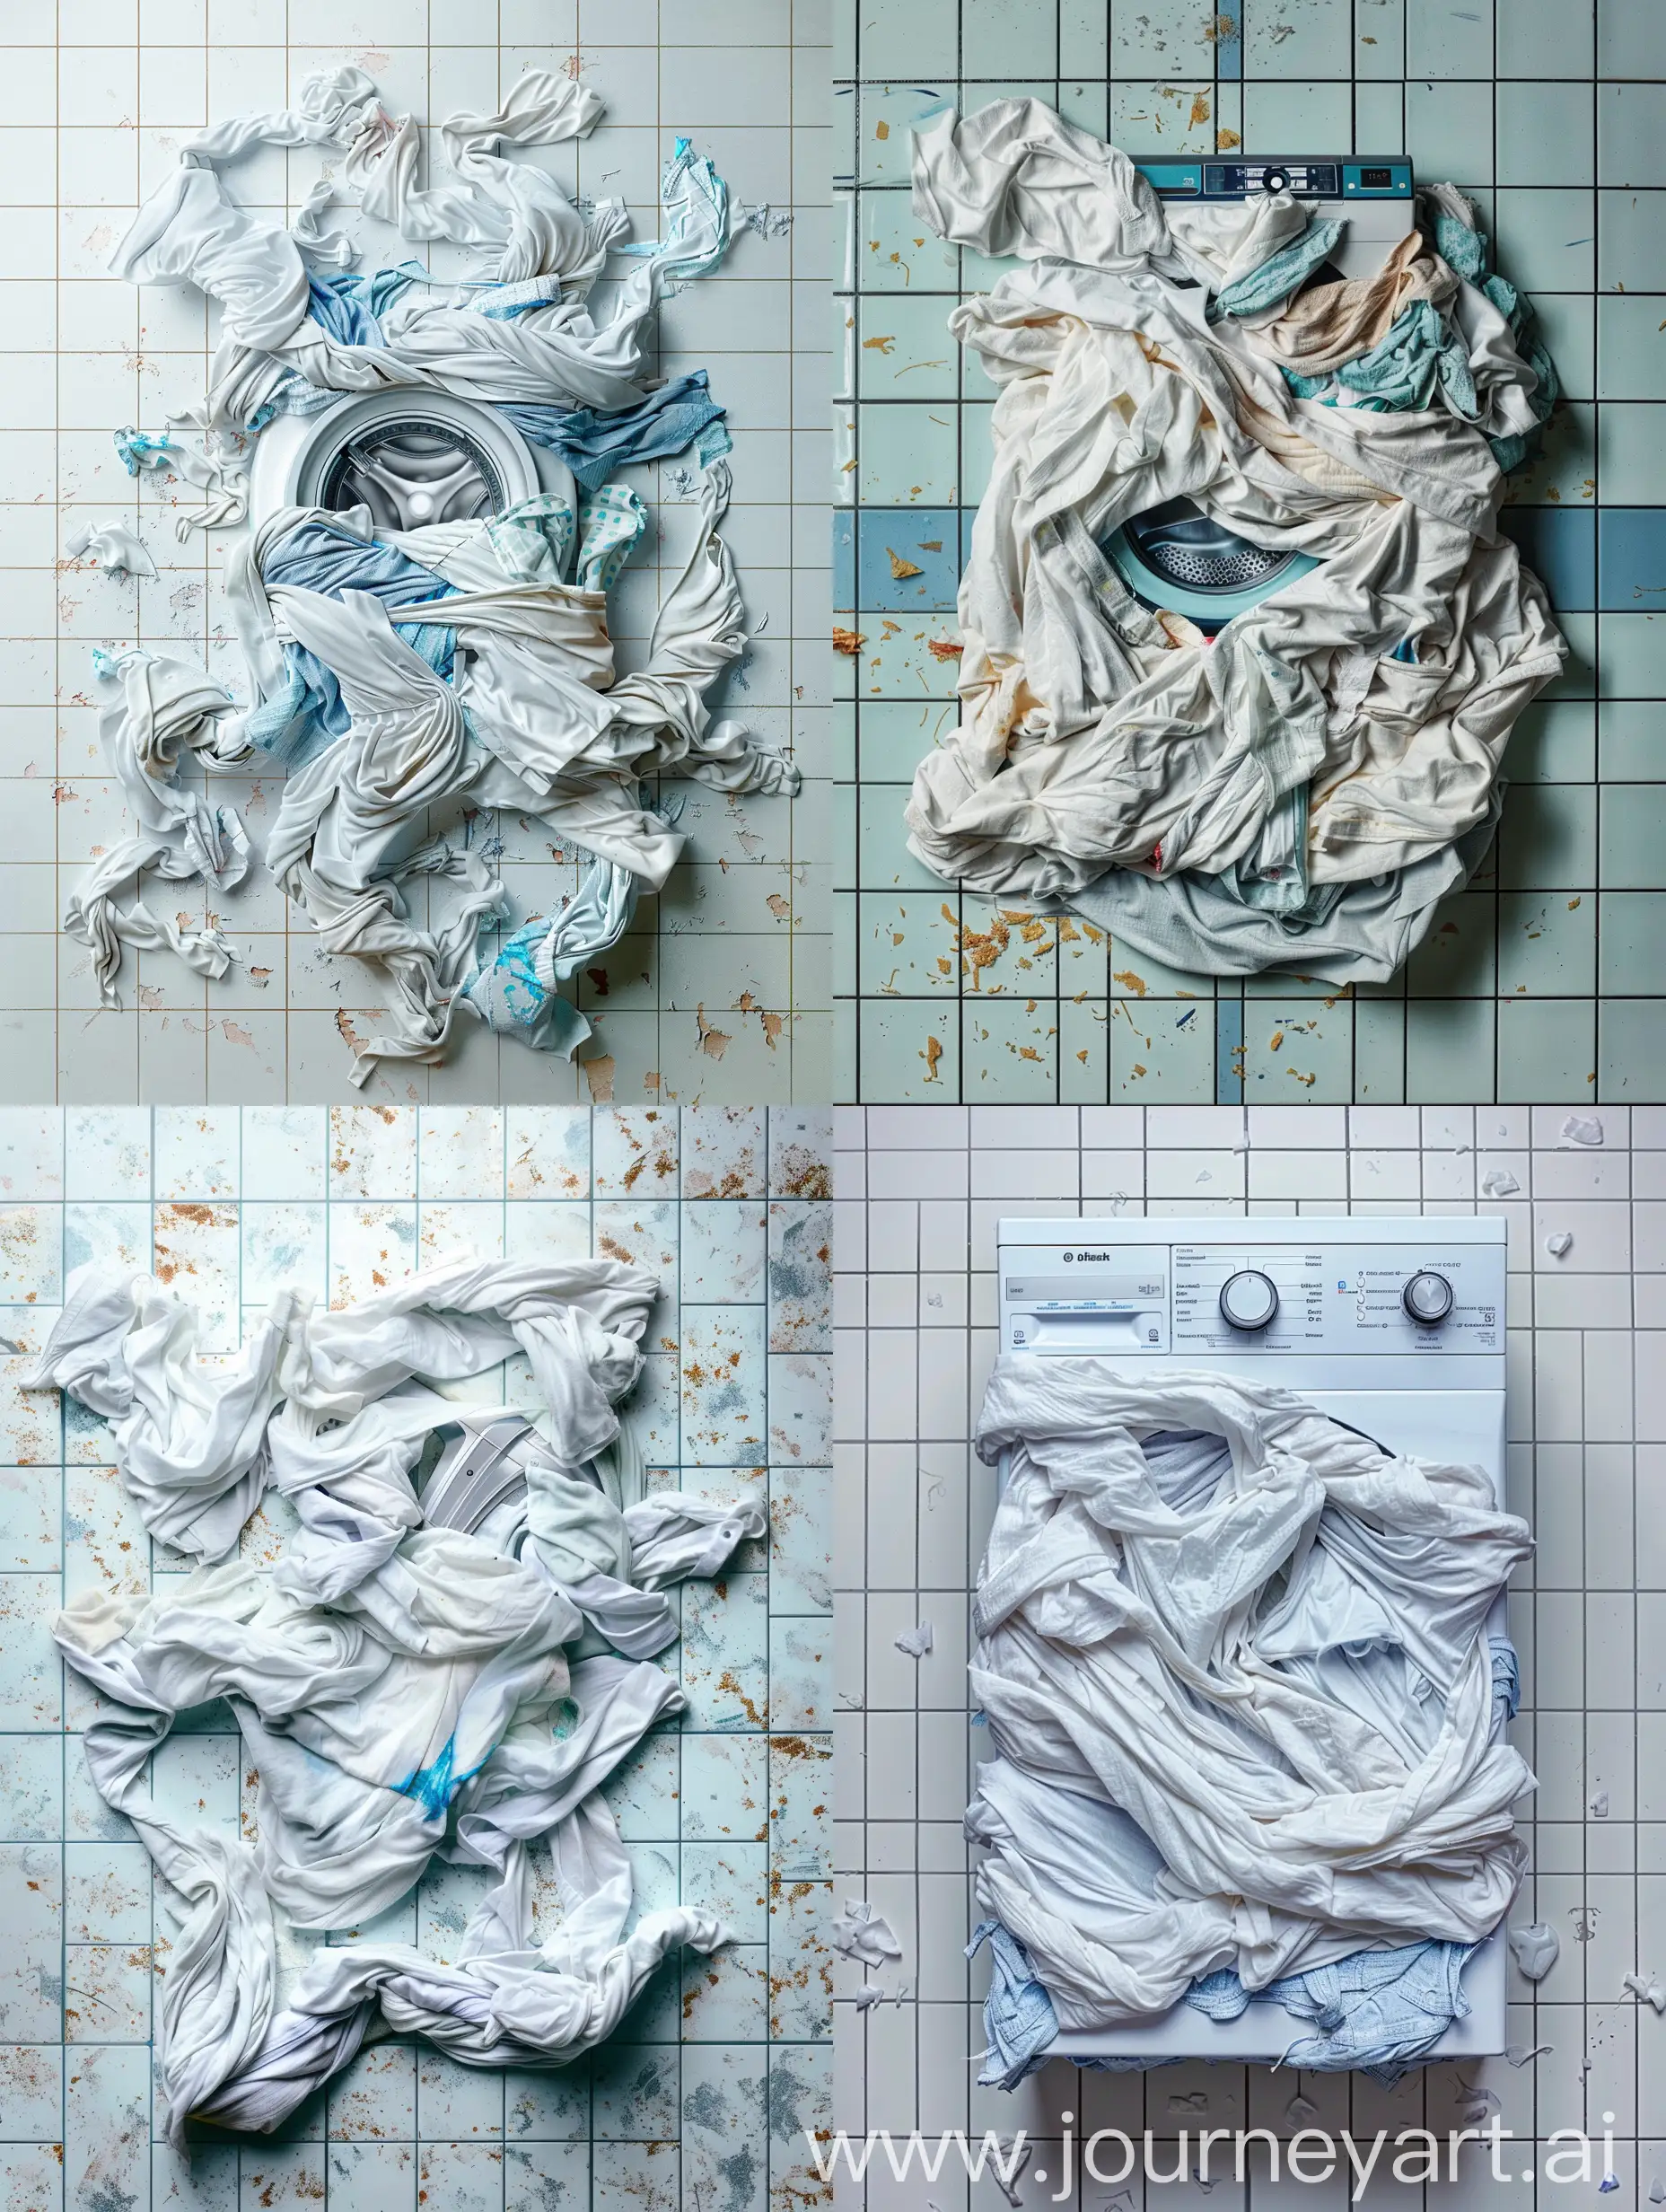 Creative-Laundry-Art-Washing-Machine-Made-from-Dirty-Clothes-on-Tiled-Floor